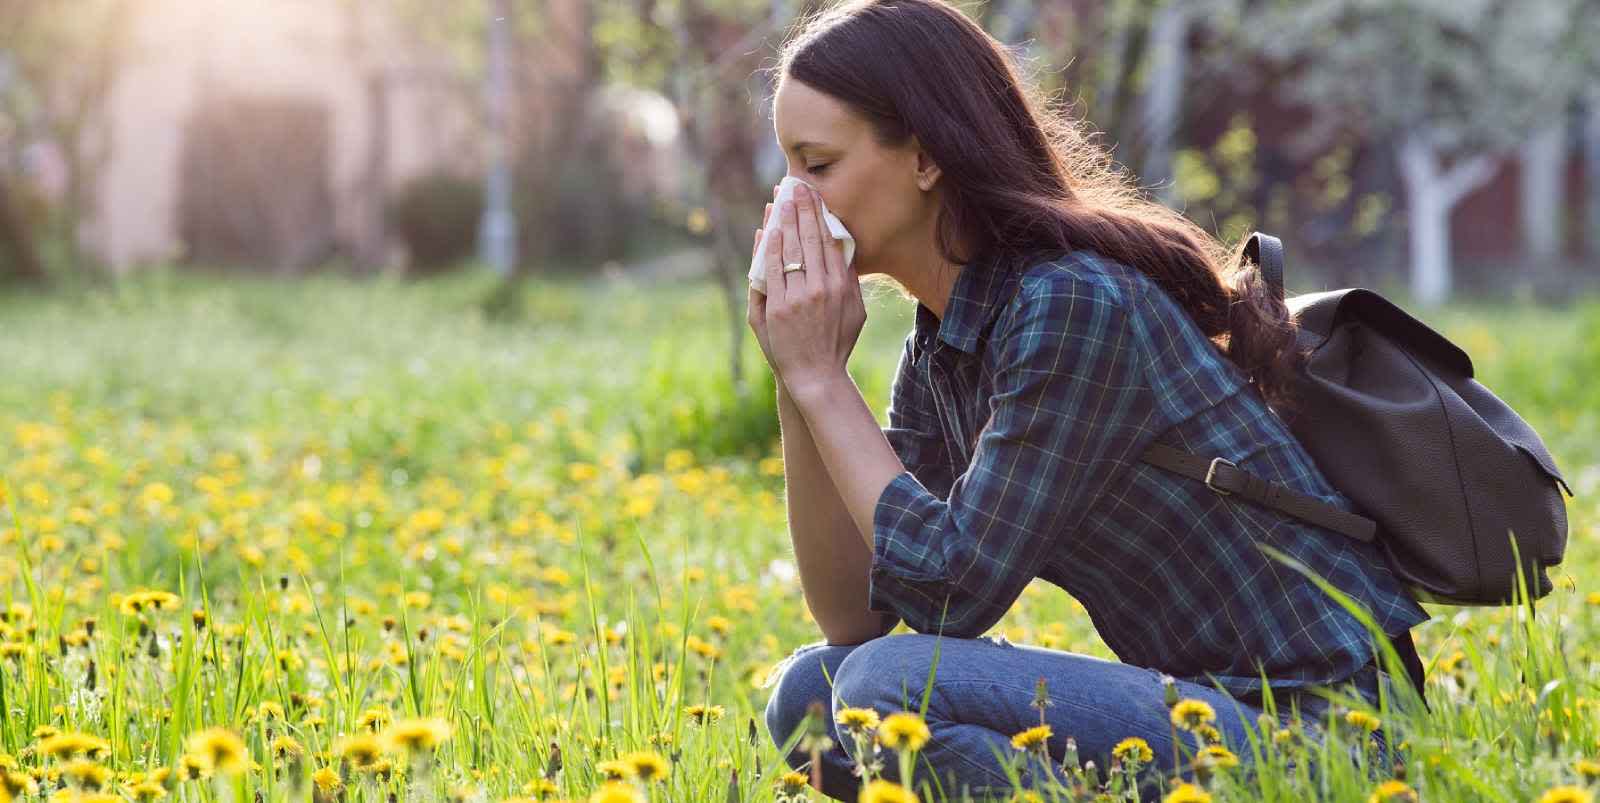 Woman hiking outdoors experiencing allergic reaction as a cause of inflammation